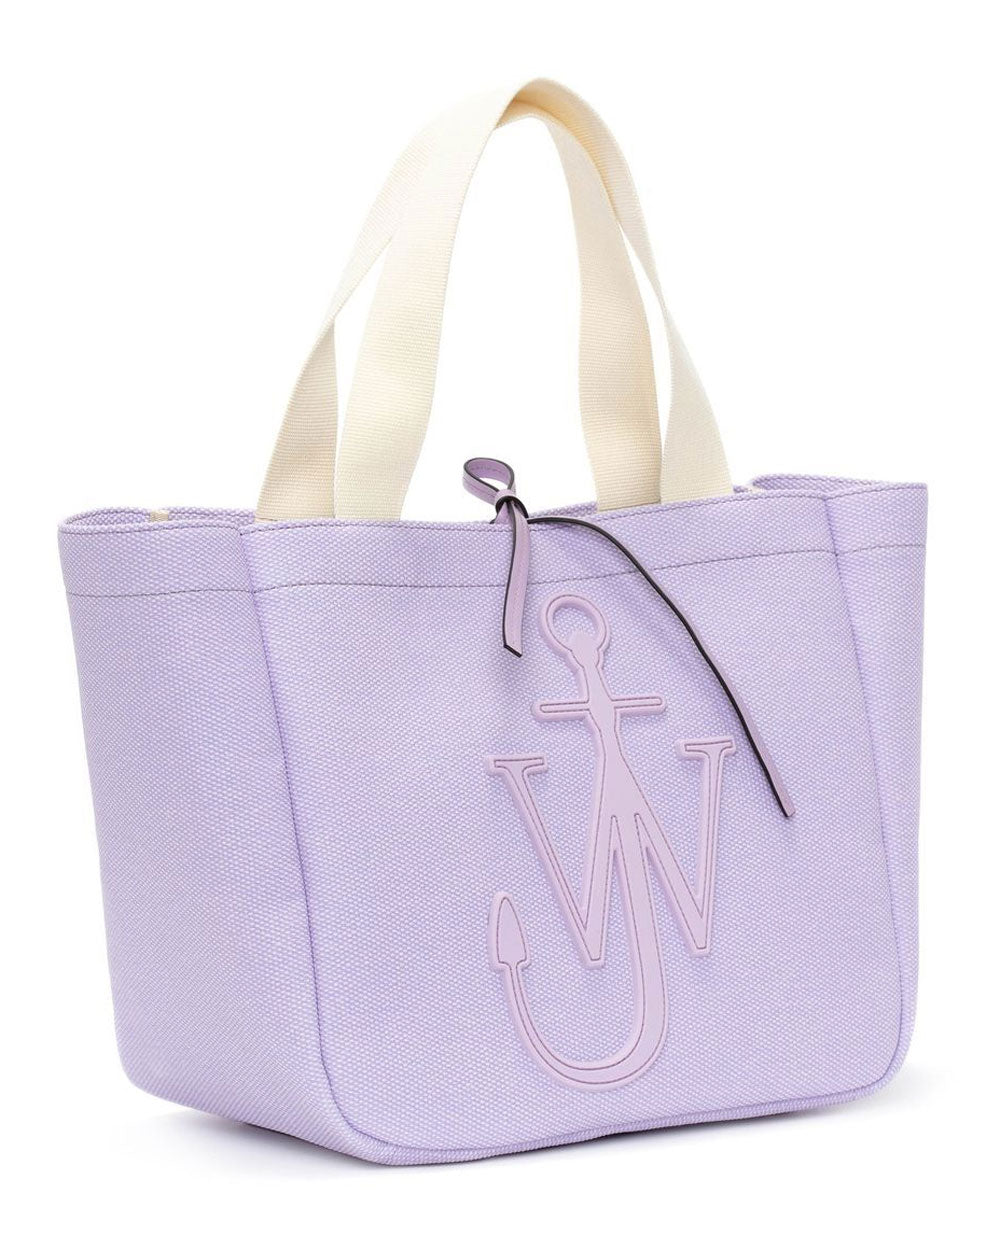 Cabas Tote in Lilac